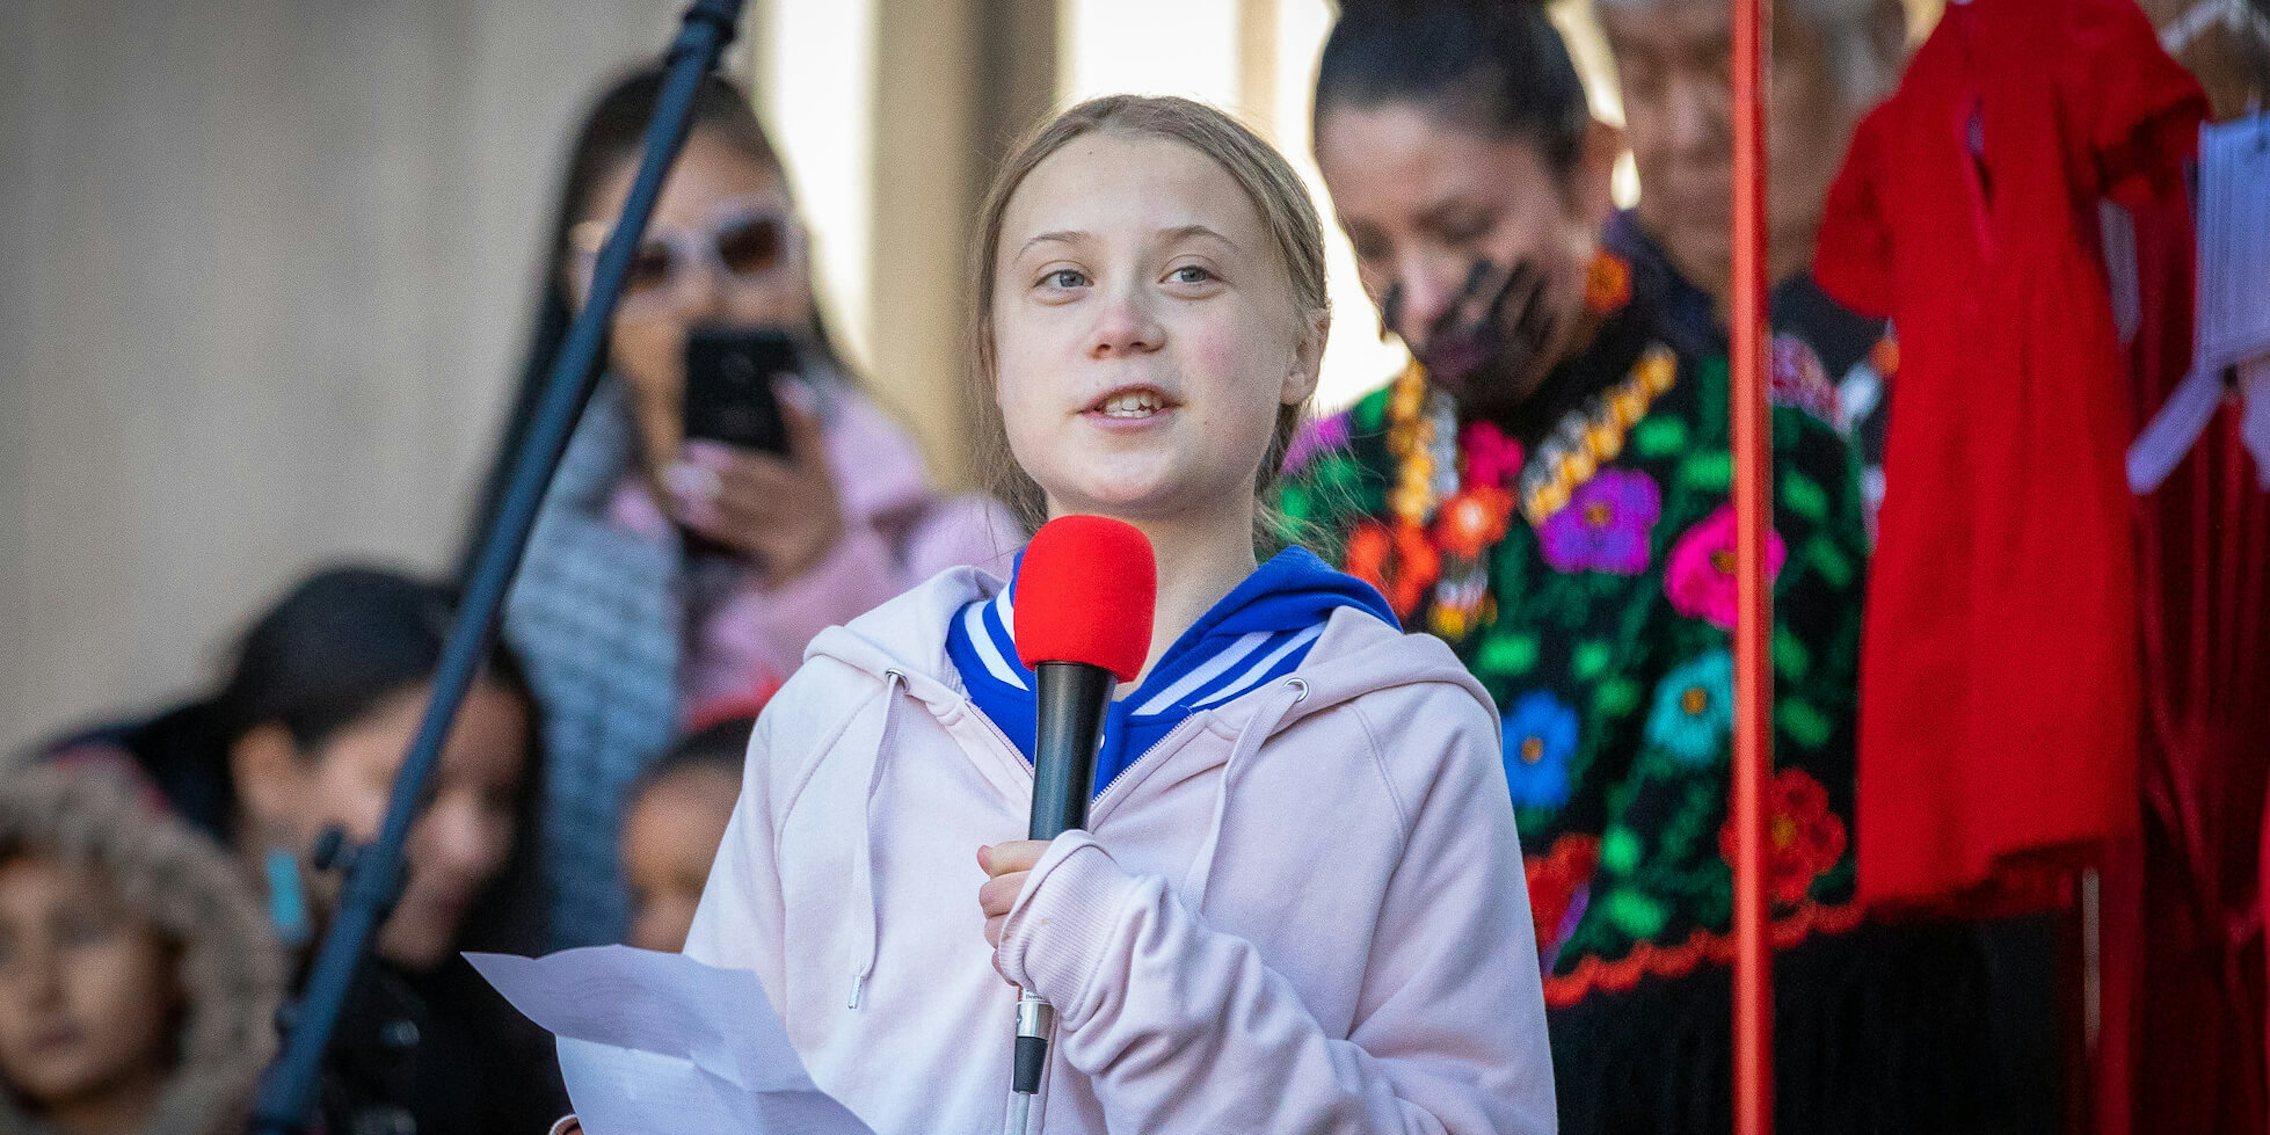 Greta Thunberg Time Person of the Year